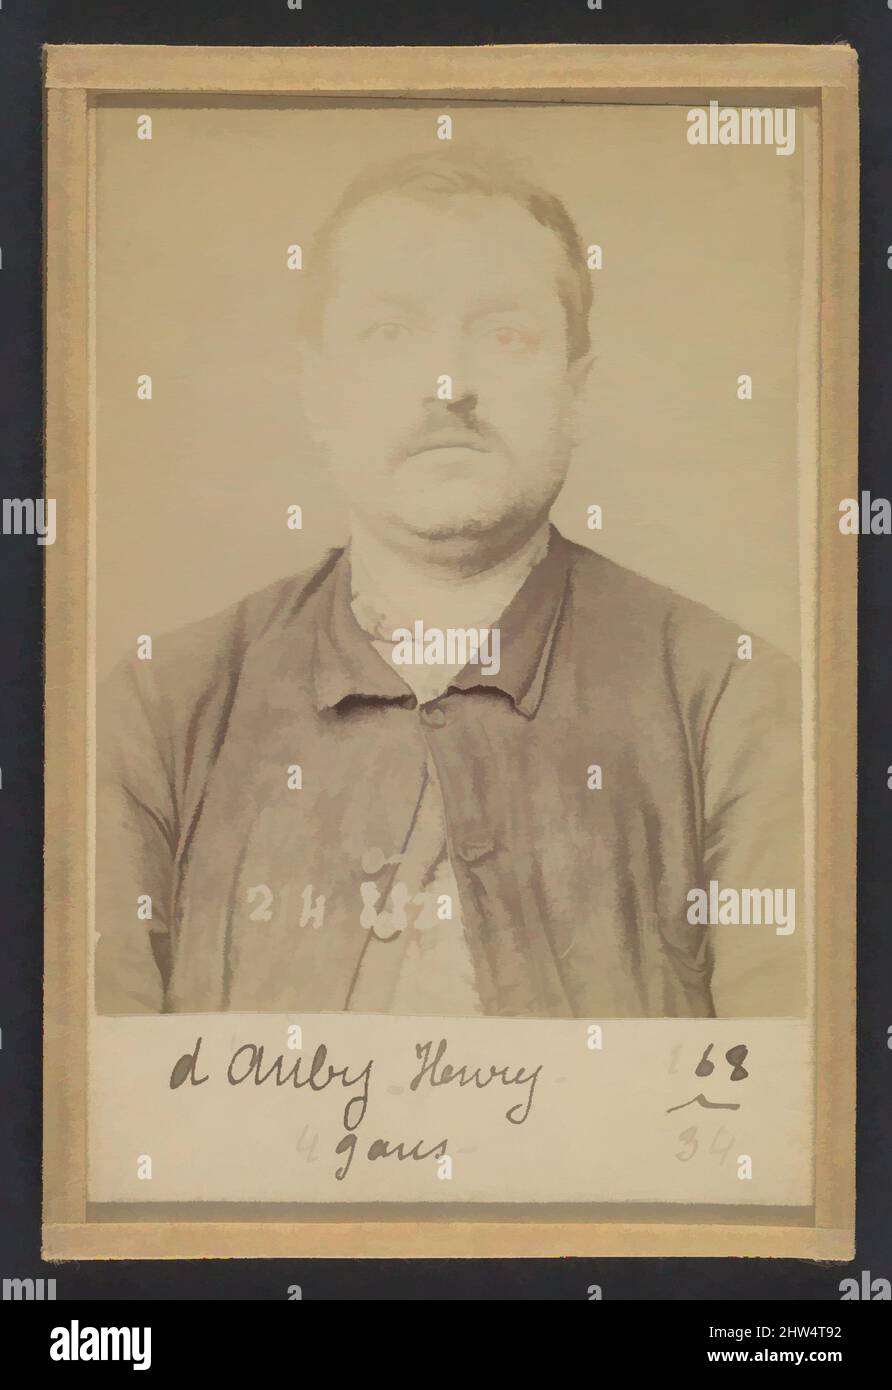 Art inspired by D'Auby. Henri. 48 (ou 49) ans, né à Montmédy (Meuse). Menuisier. Anarchiste. 28/2/94., 1894, Albumen silver print from glass negative, 10.5 x 7 x 0.5 cm (4 1/8 x 2 3/4 x 3/16 in.) each, Photographs, Alphonse Bertillon (French, 1853–1914), Born into a distinguished, Classic works modernized by Artotop with a splash of modernity. Shapes, color and value, eye-catching visual impact on art. Emotions through freedom of artworks in a contemporary way. A timeless message pursuing a wildly creative new direction. Artists turning to the digital medium and creating the Artotop NFT Stock Photo